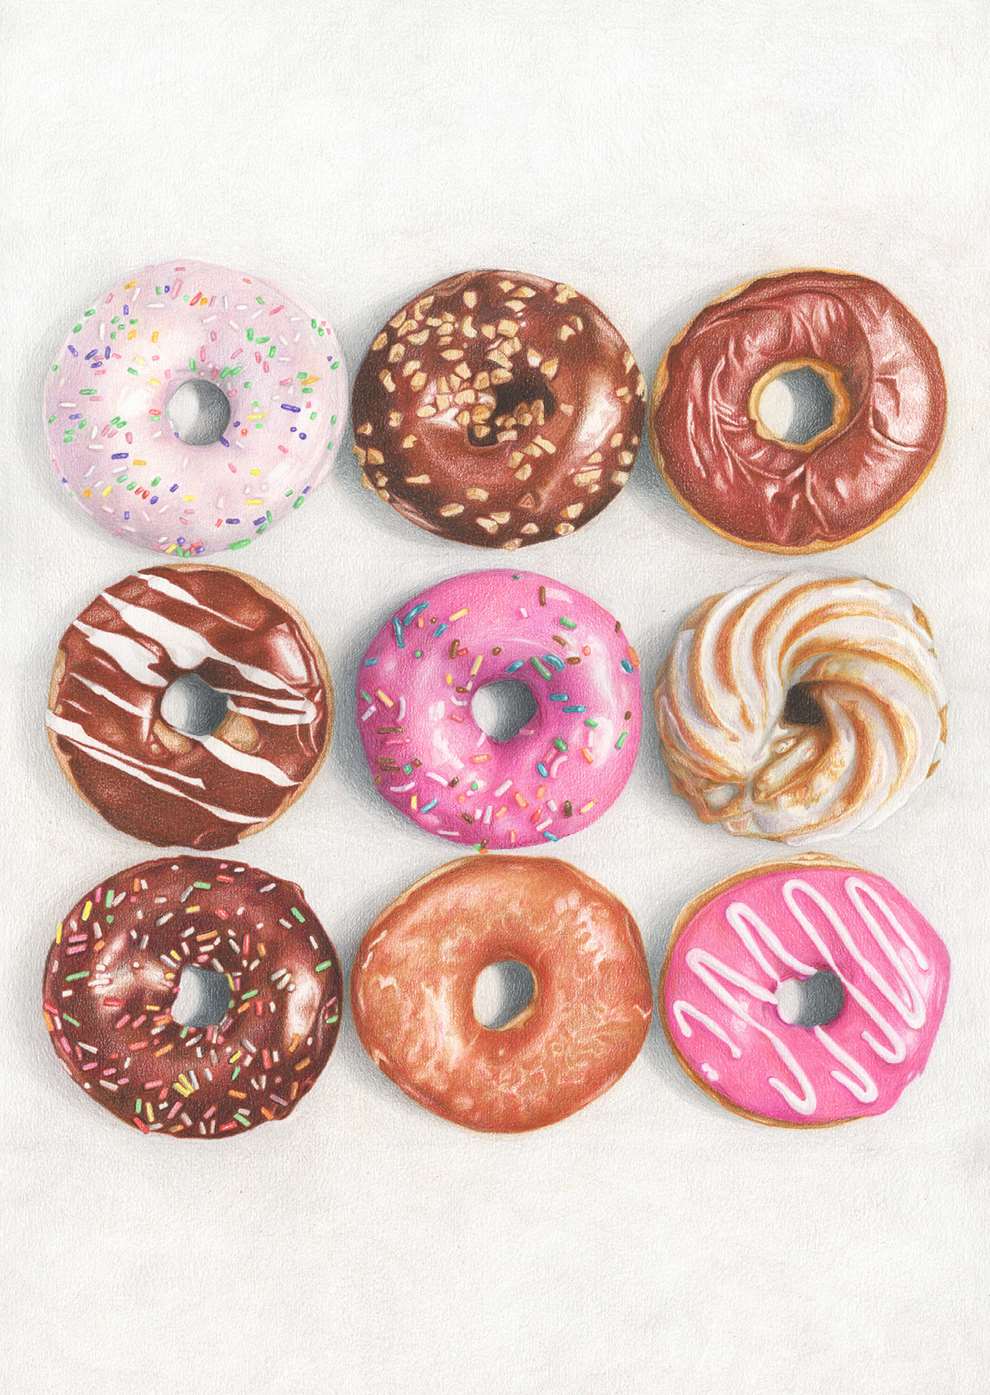 Pencil on Paper, A hand-drawn depiction of ring doughnuts, glazed in bright colours and sprinkles, using pencils.